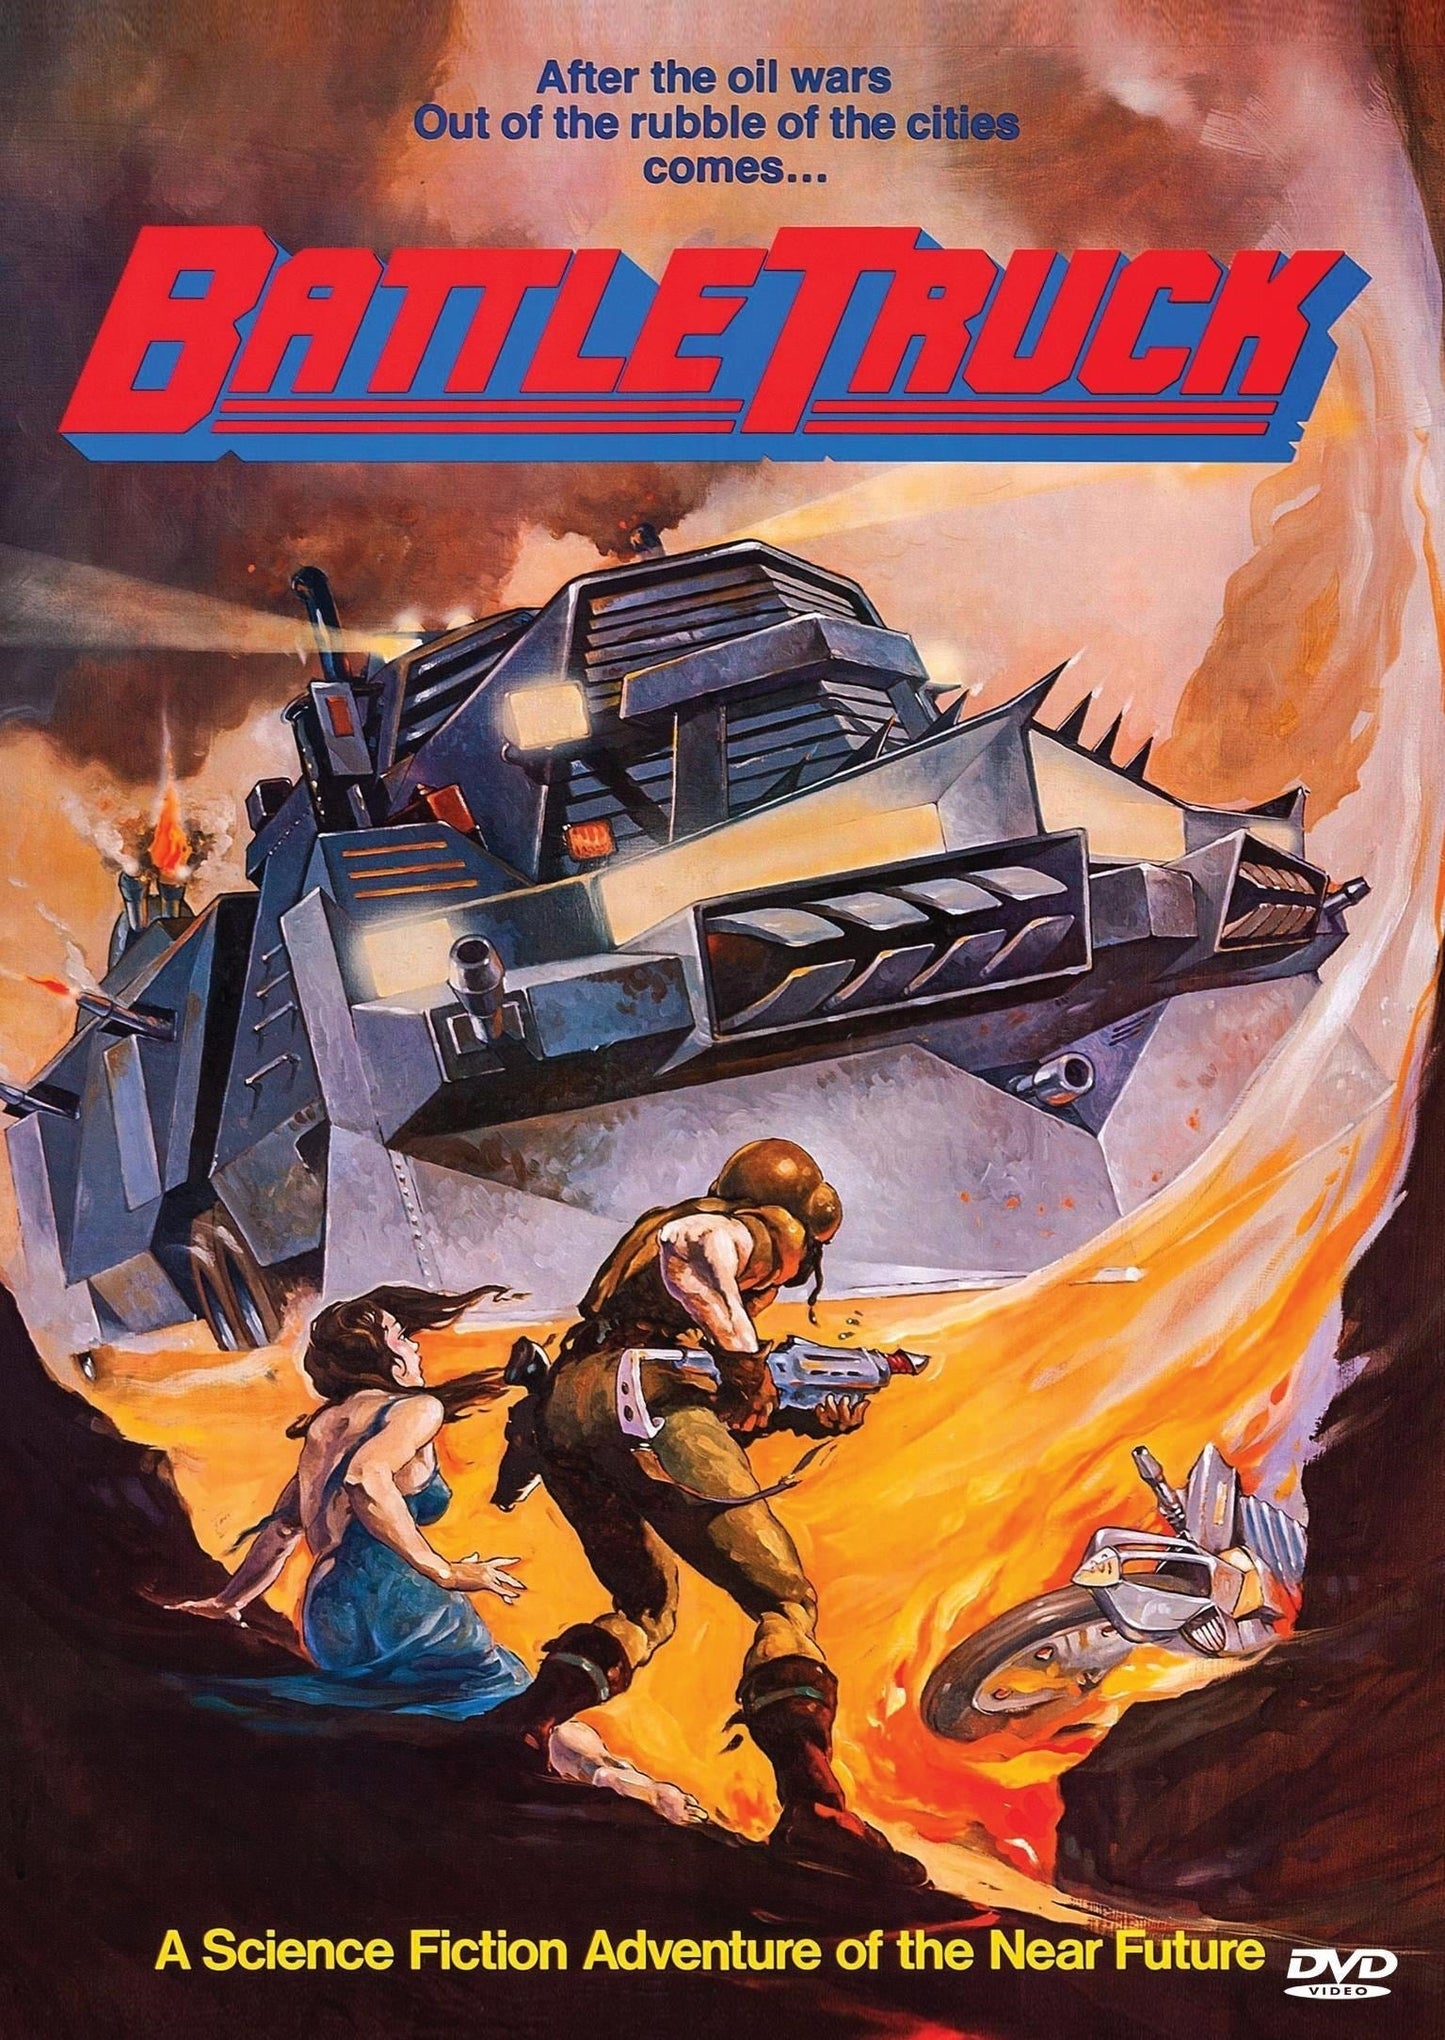 Battle Truck aka Warlords of the 21st Century rareandcollectibledvds